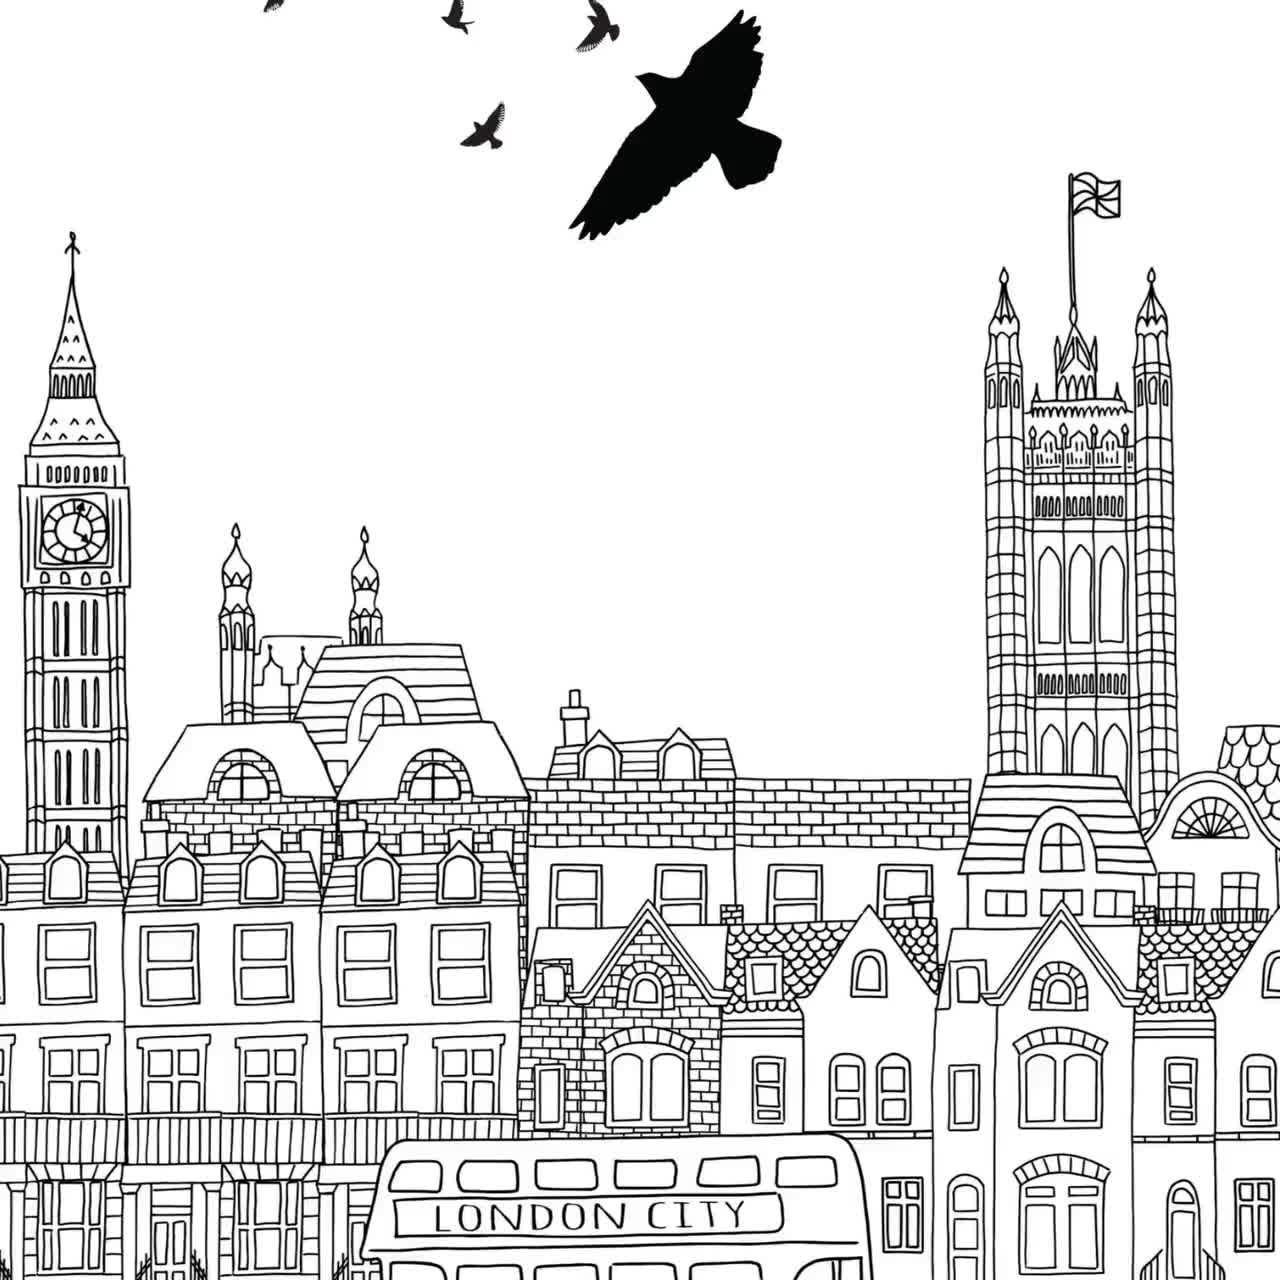 London city coloring sheet printable for adults kidshand drawn illustration blackwhite postercoloring page as bannerinstant download